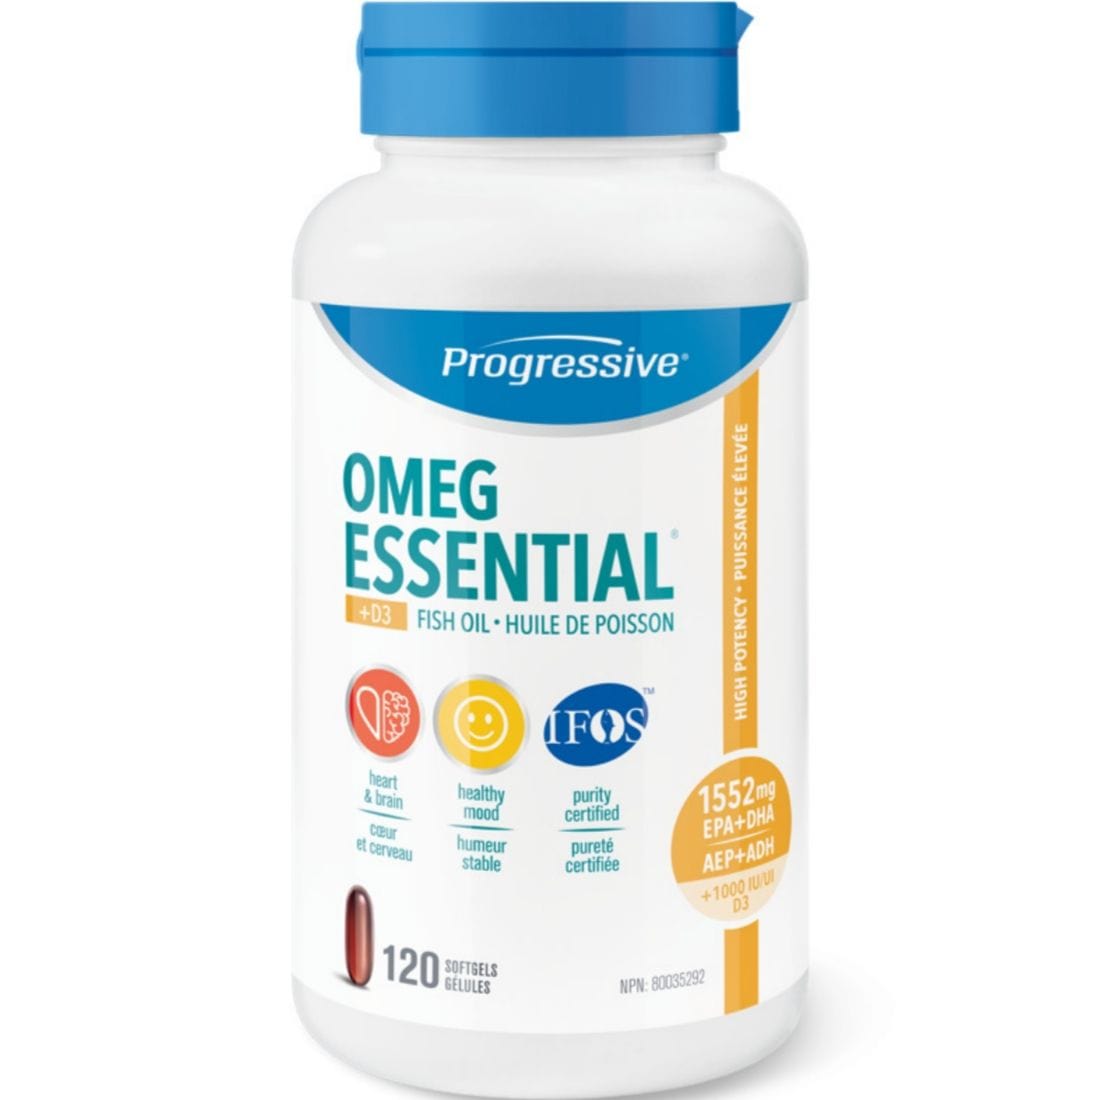 Progressive OmegEssential + D, High Potency Fish Oil